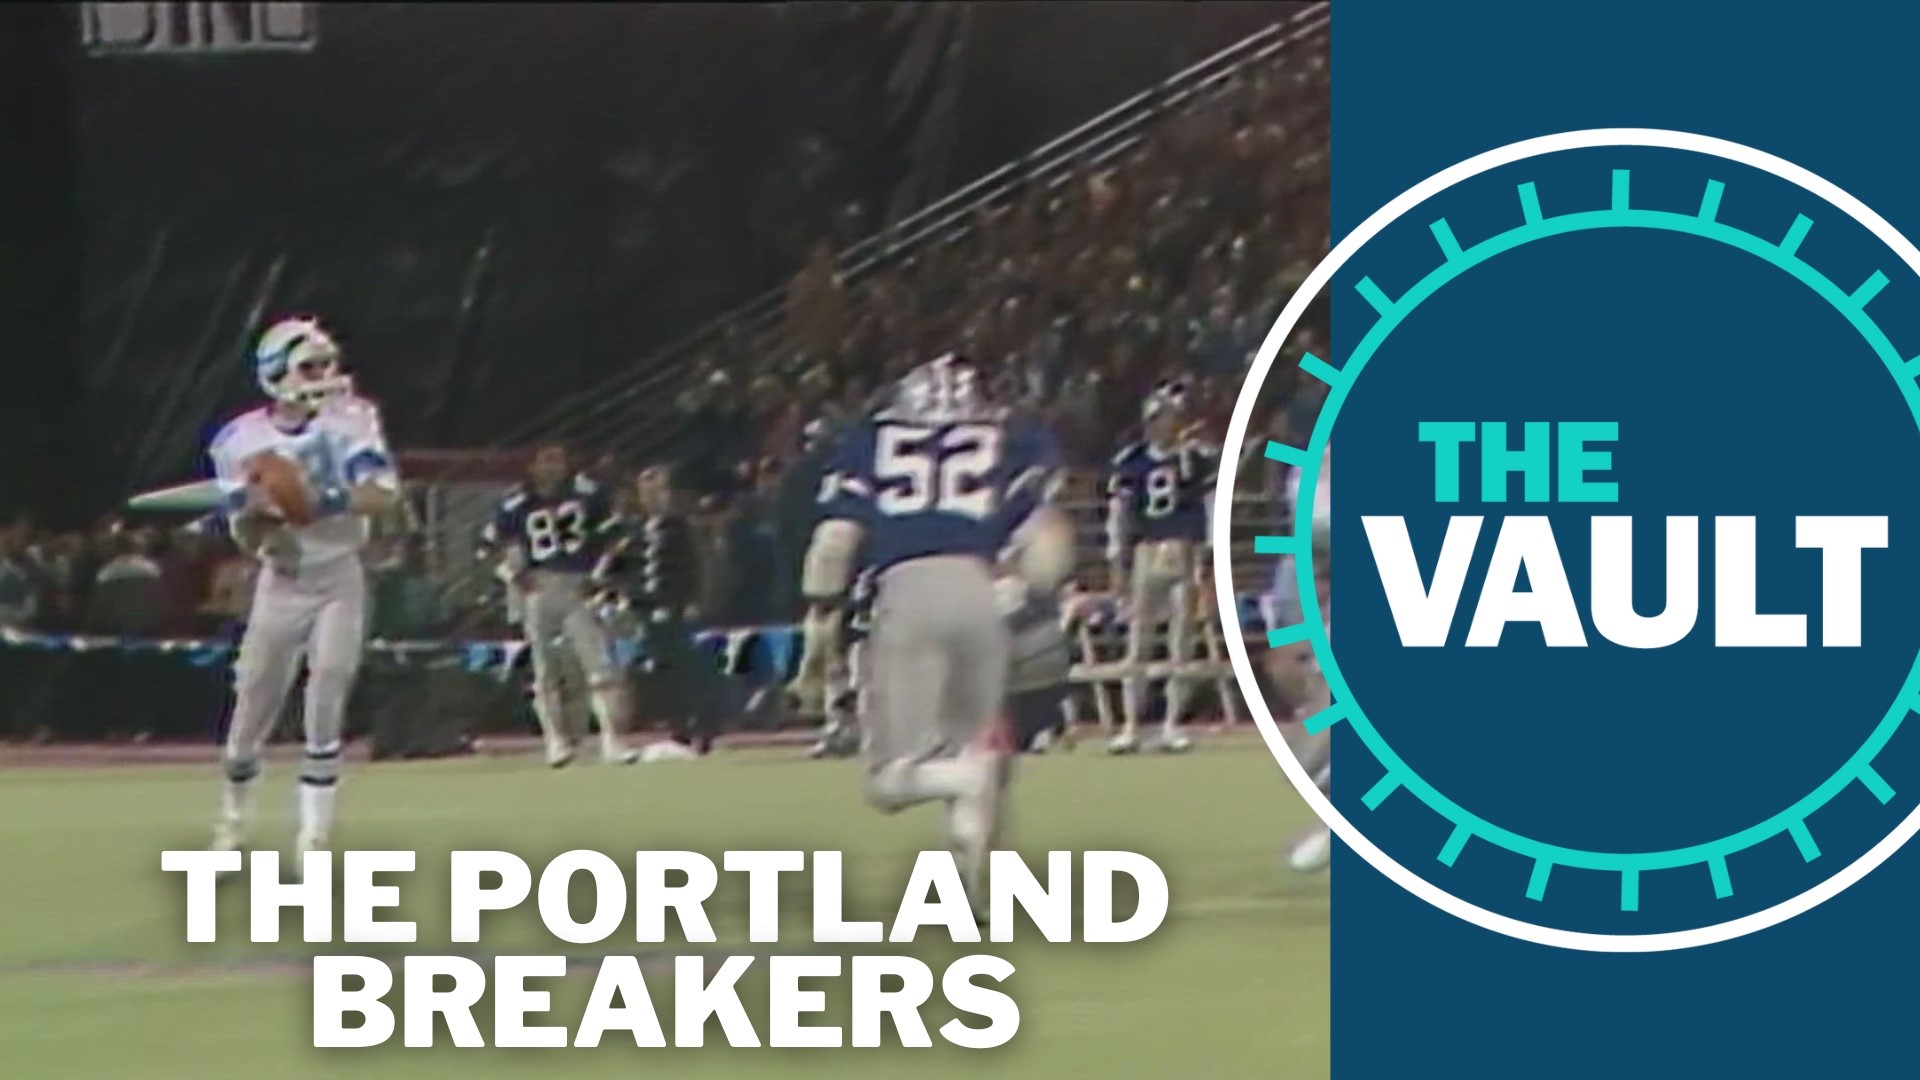 The Portland Breakers were part of the USFL, a league that briefly looked to compete with the NFL. It folded after only a few years.